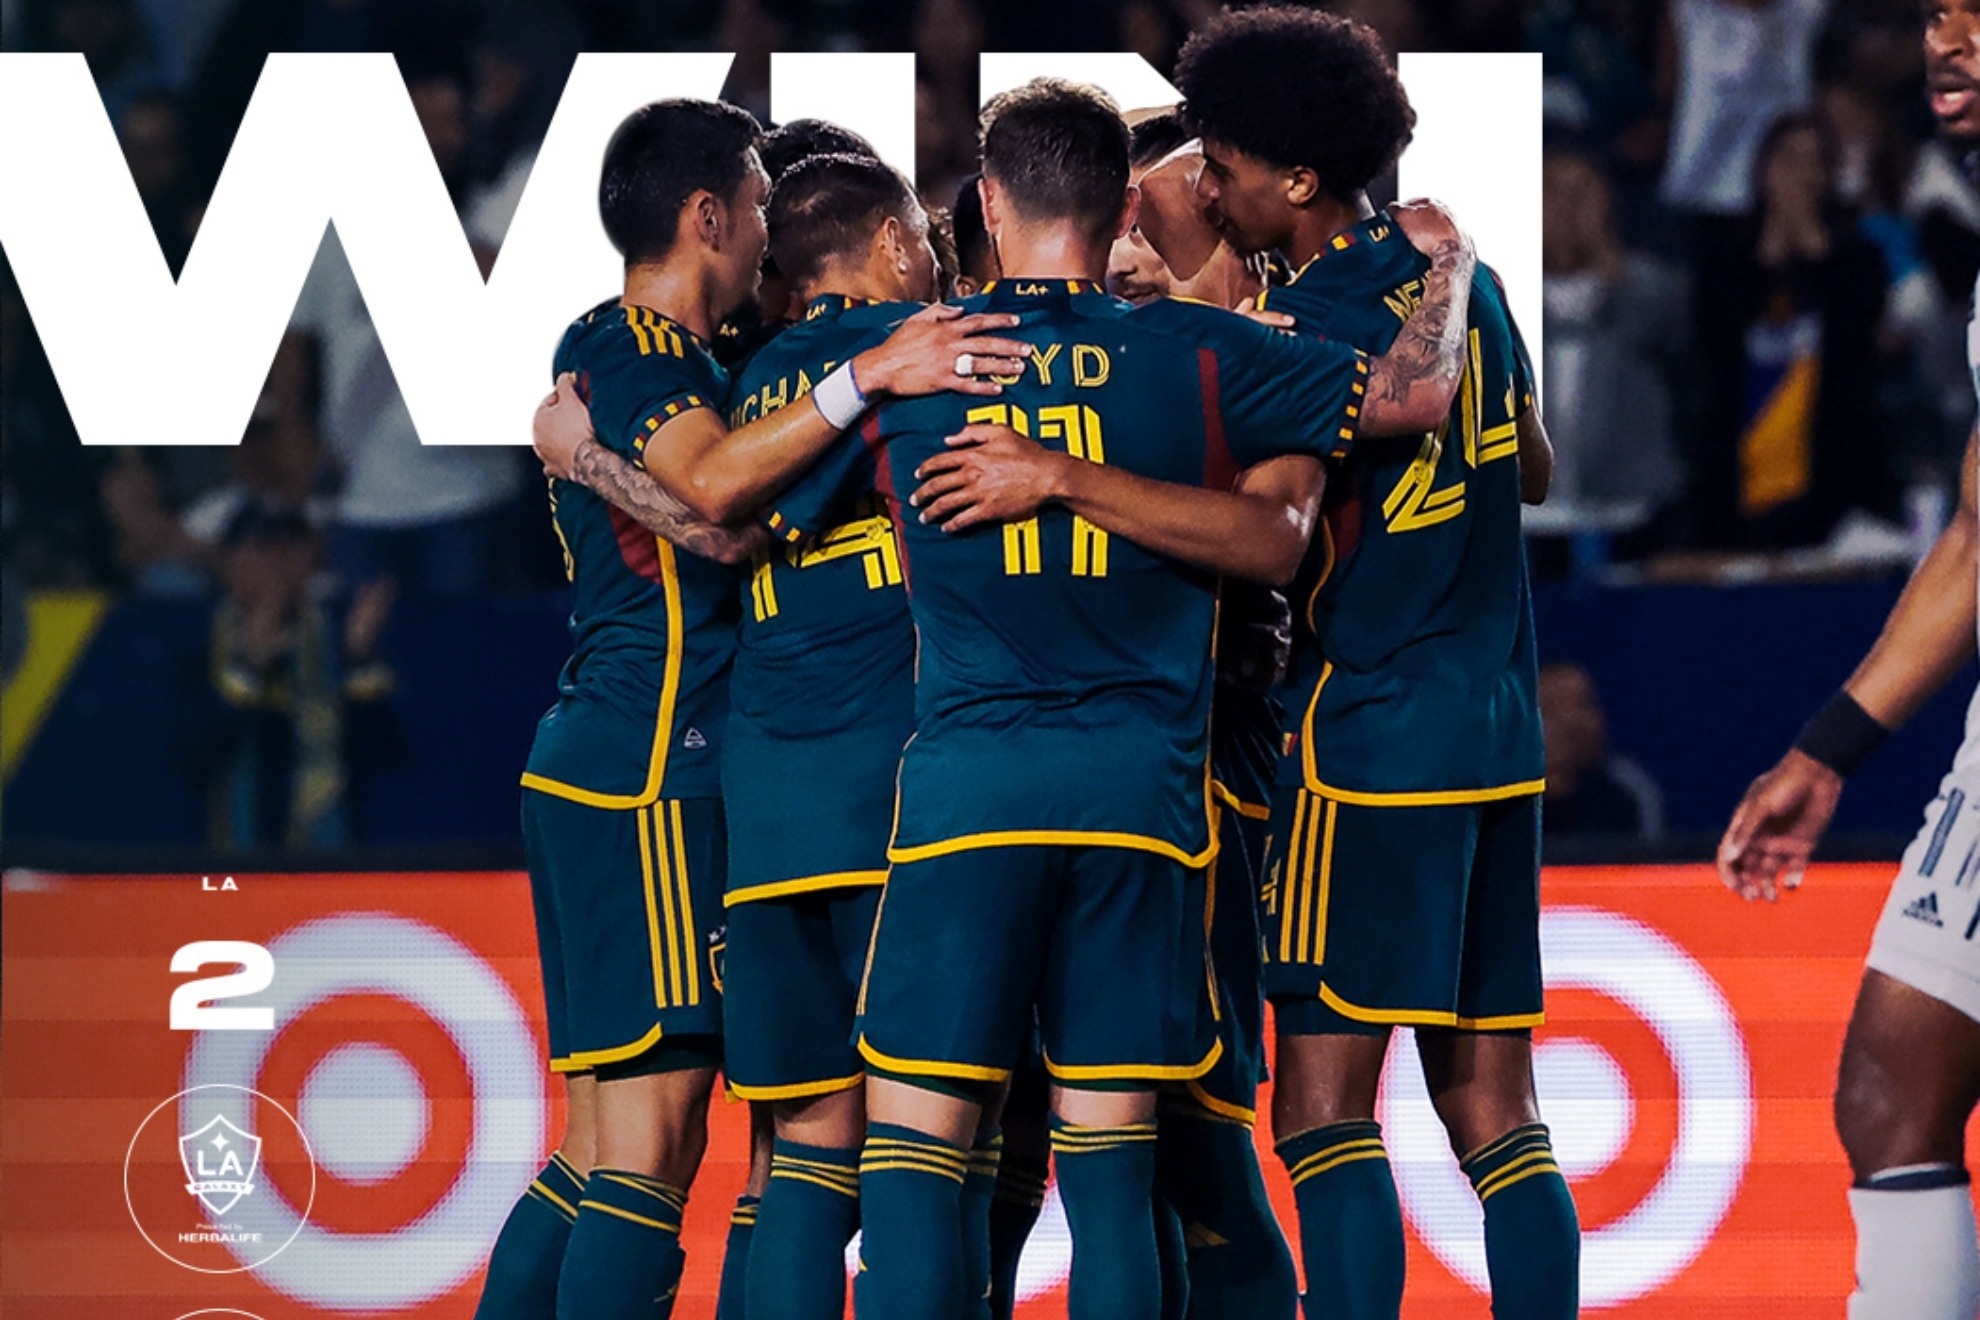 LA Galaxy climb out of Western Conference's basement with a second win of the season, now over San Jose